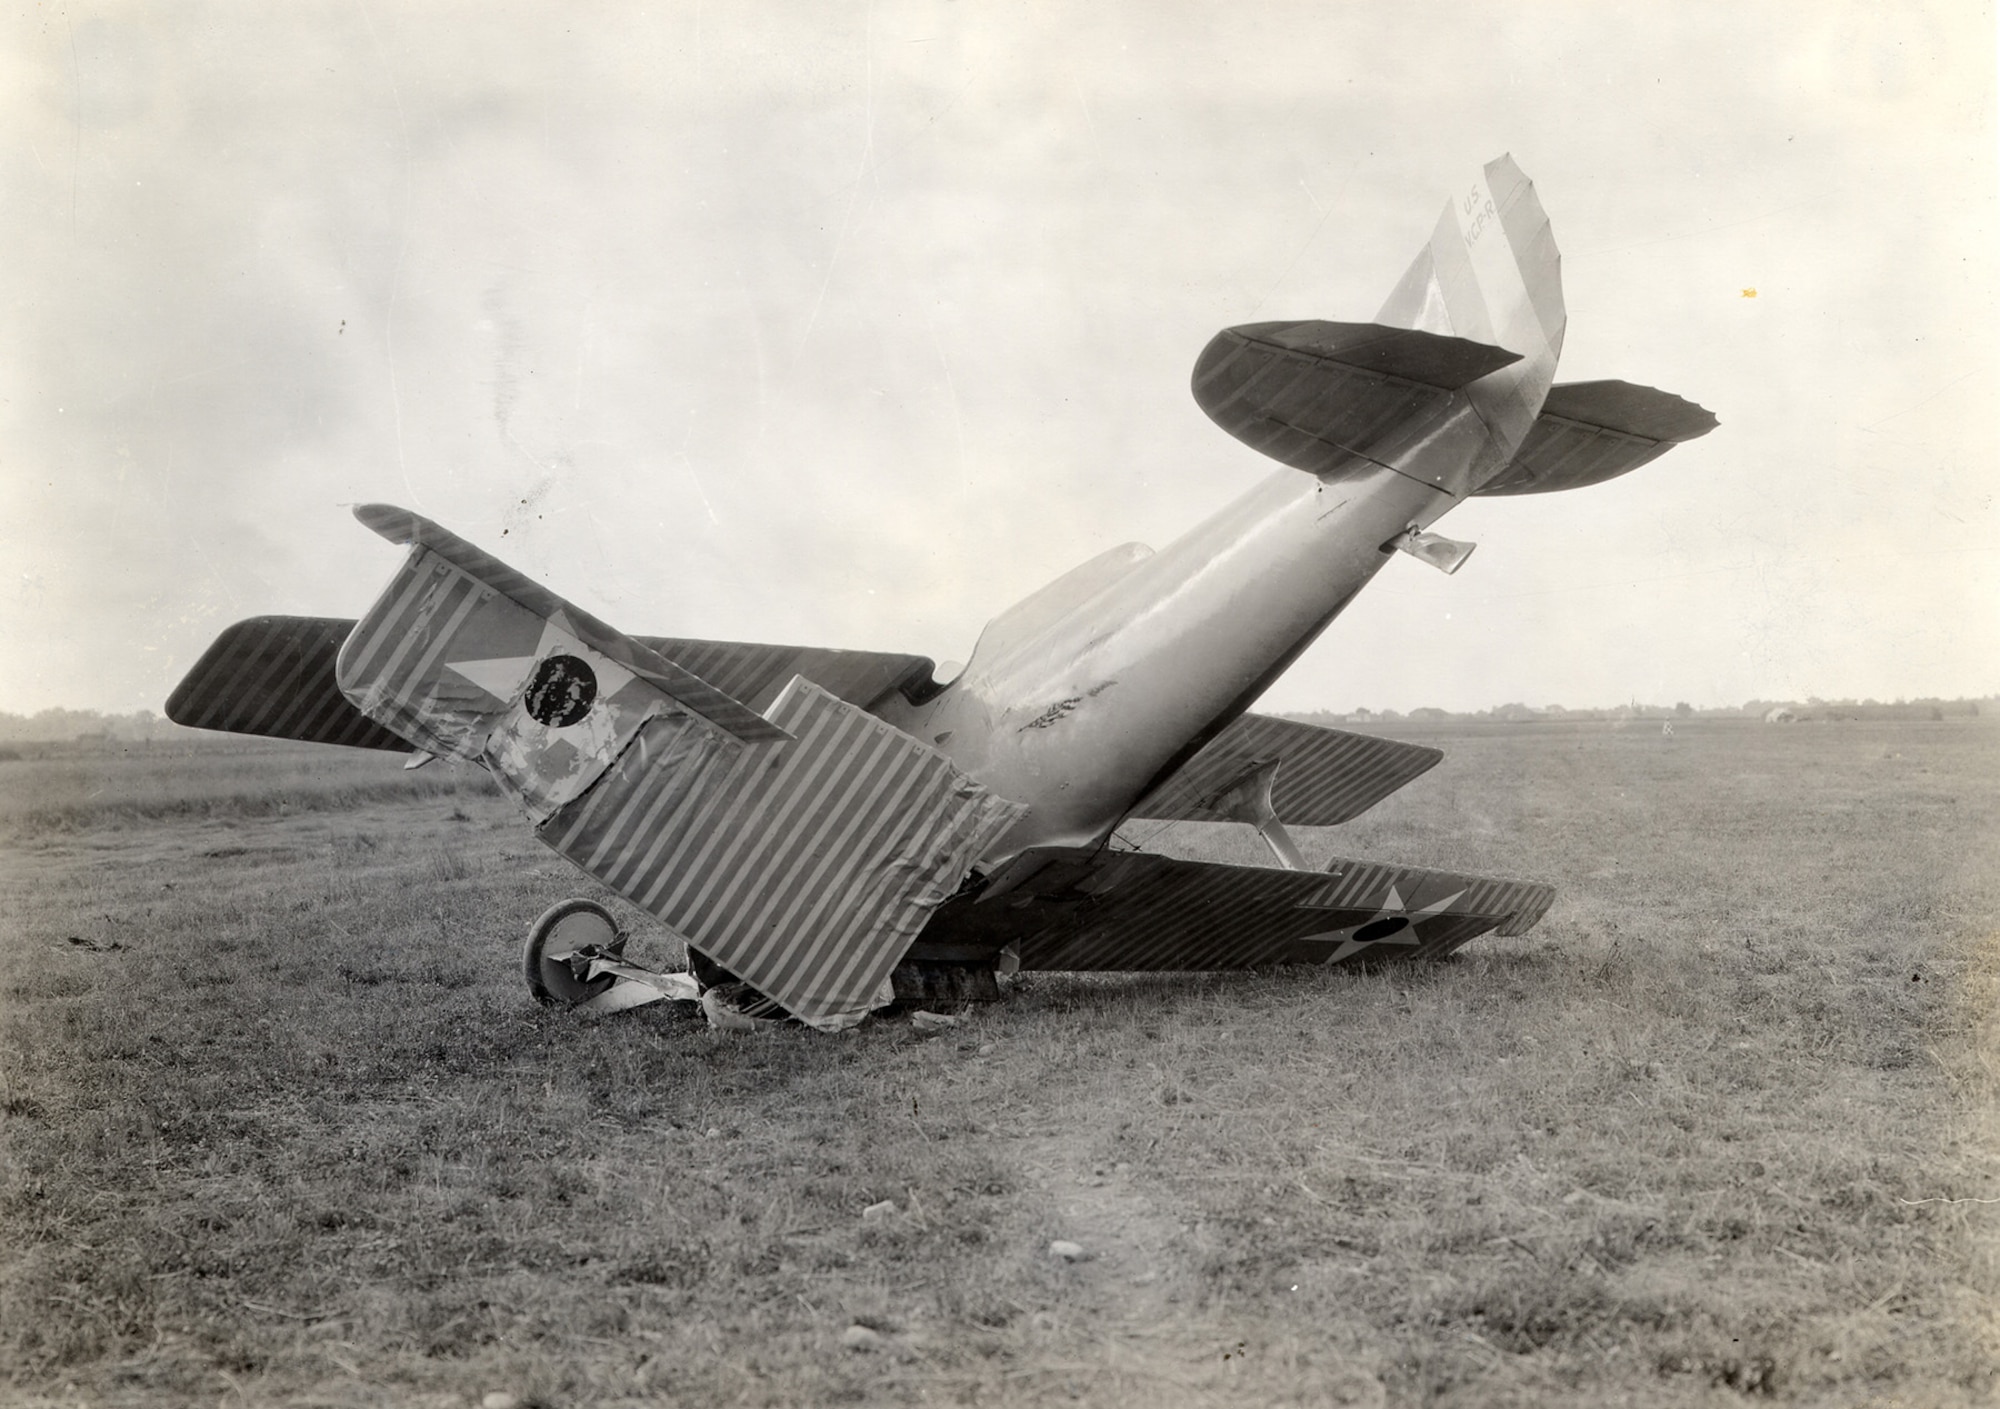 The VCP-R was damaged on Aug. 2, 1920, after colliding on landing with an automobile that had been timing its speed tests at Wright Field (now Patterson Field area of Wright-Patterson Air Force Base). Schroeder broke his goggles in this accident but was not seriously injured. (U.S. Air Force photo)